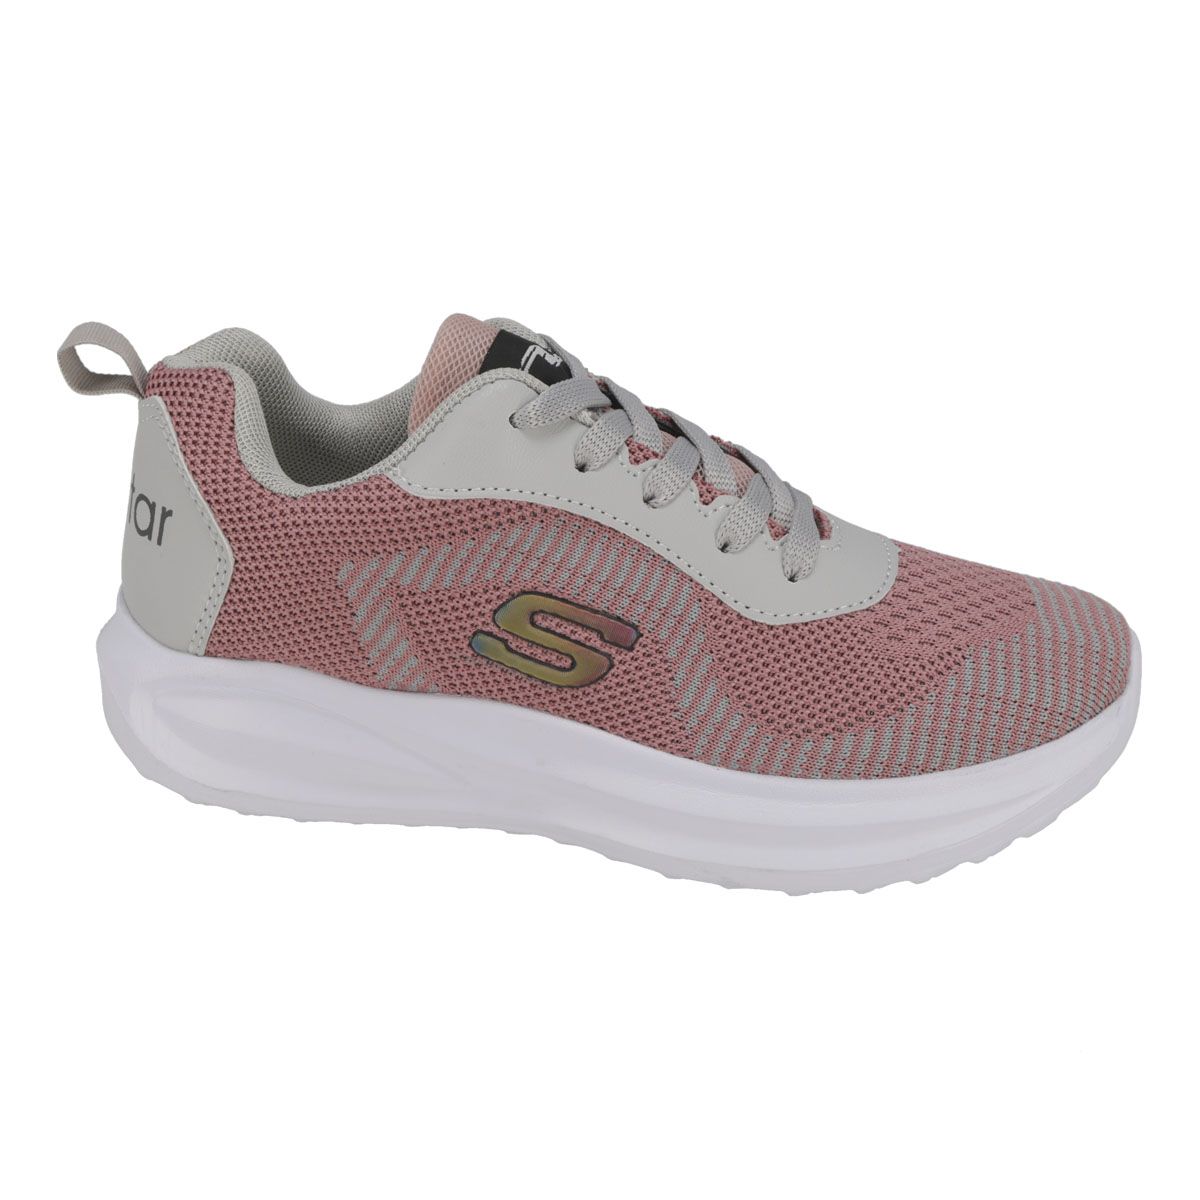 DEPORTIVO MUJER NEW STAR RN-22 GRIS/CORAL